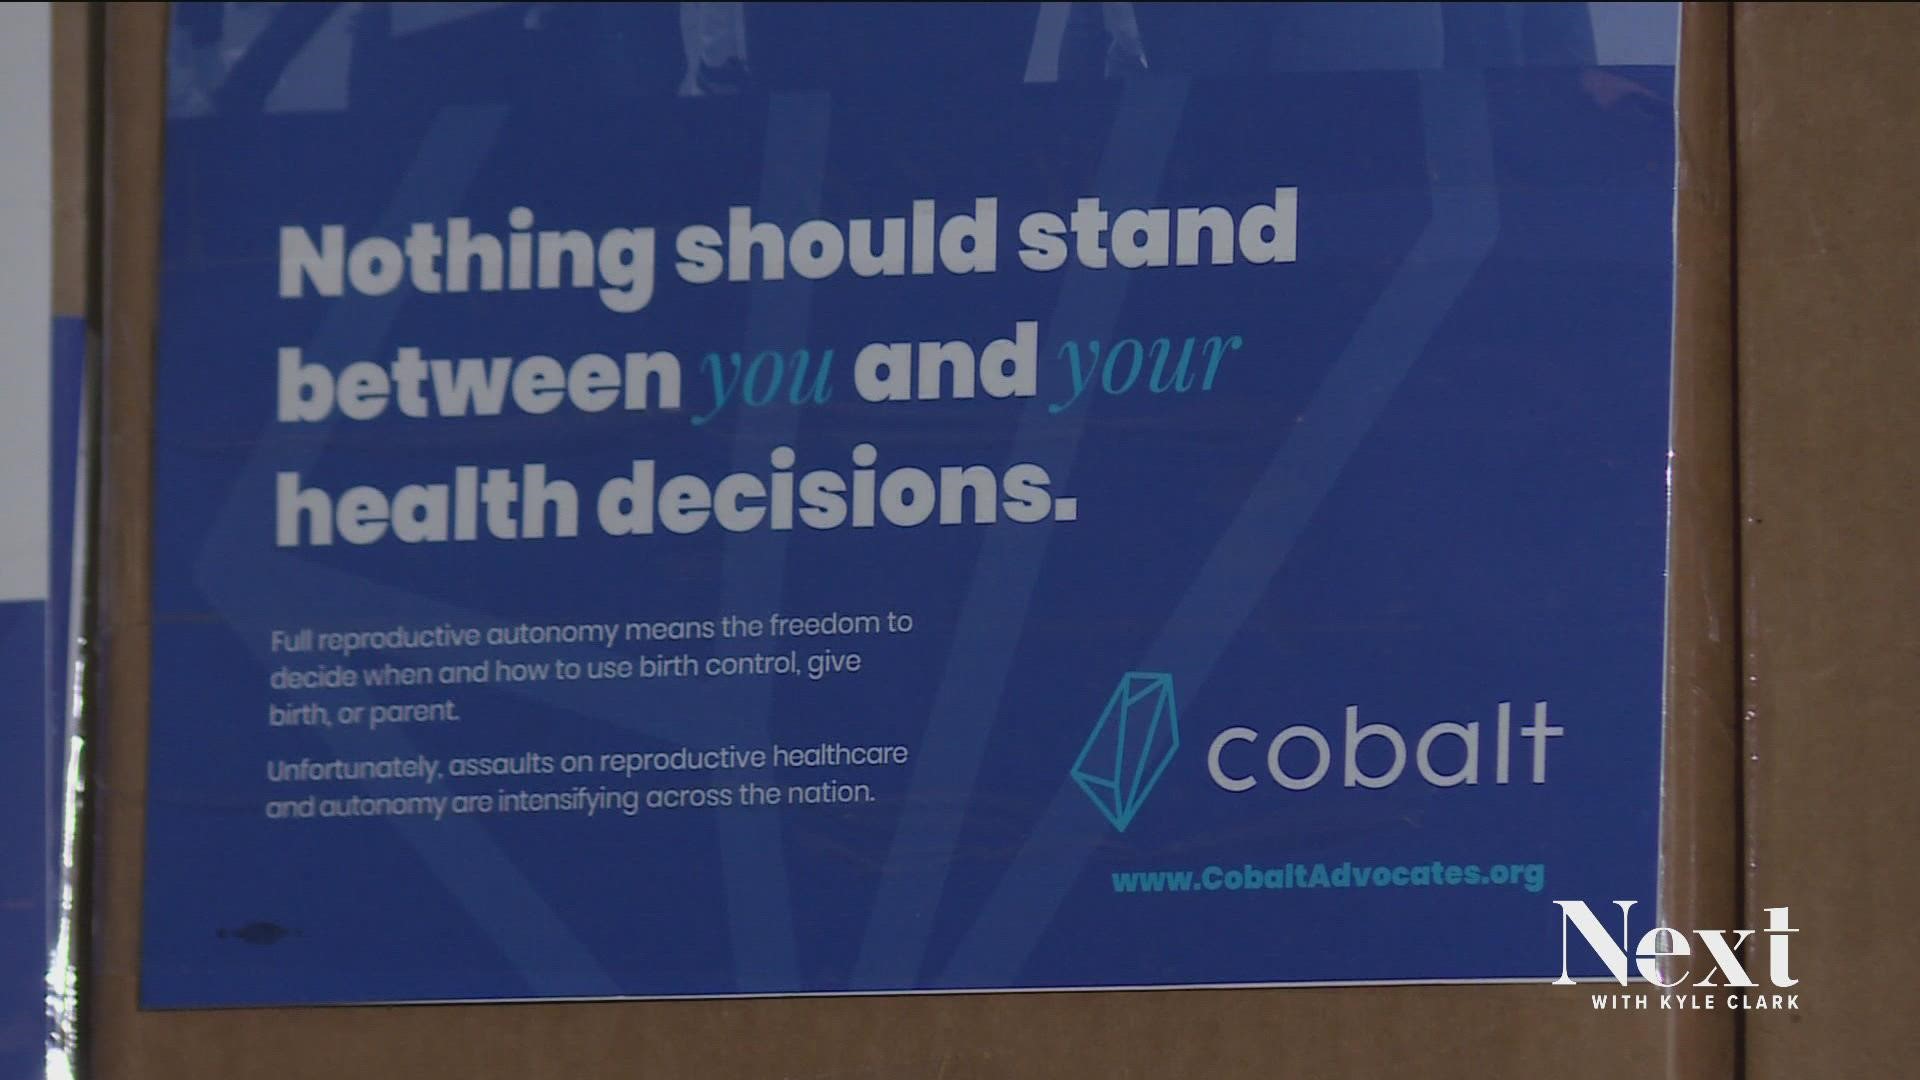 Groups like COBALT, which supports a woman's right to choose, have been on defense against ballot issues restricting abortion access. Now they want to play offense.